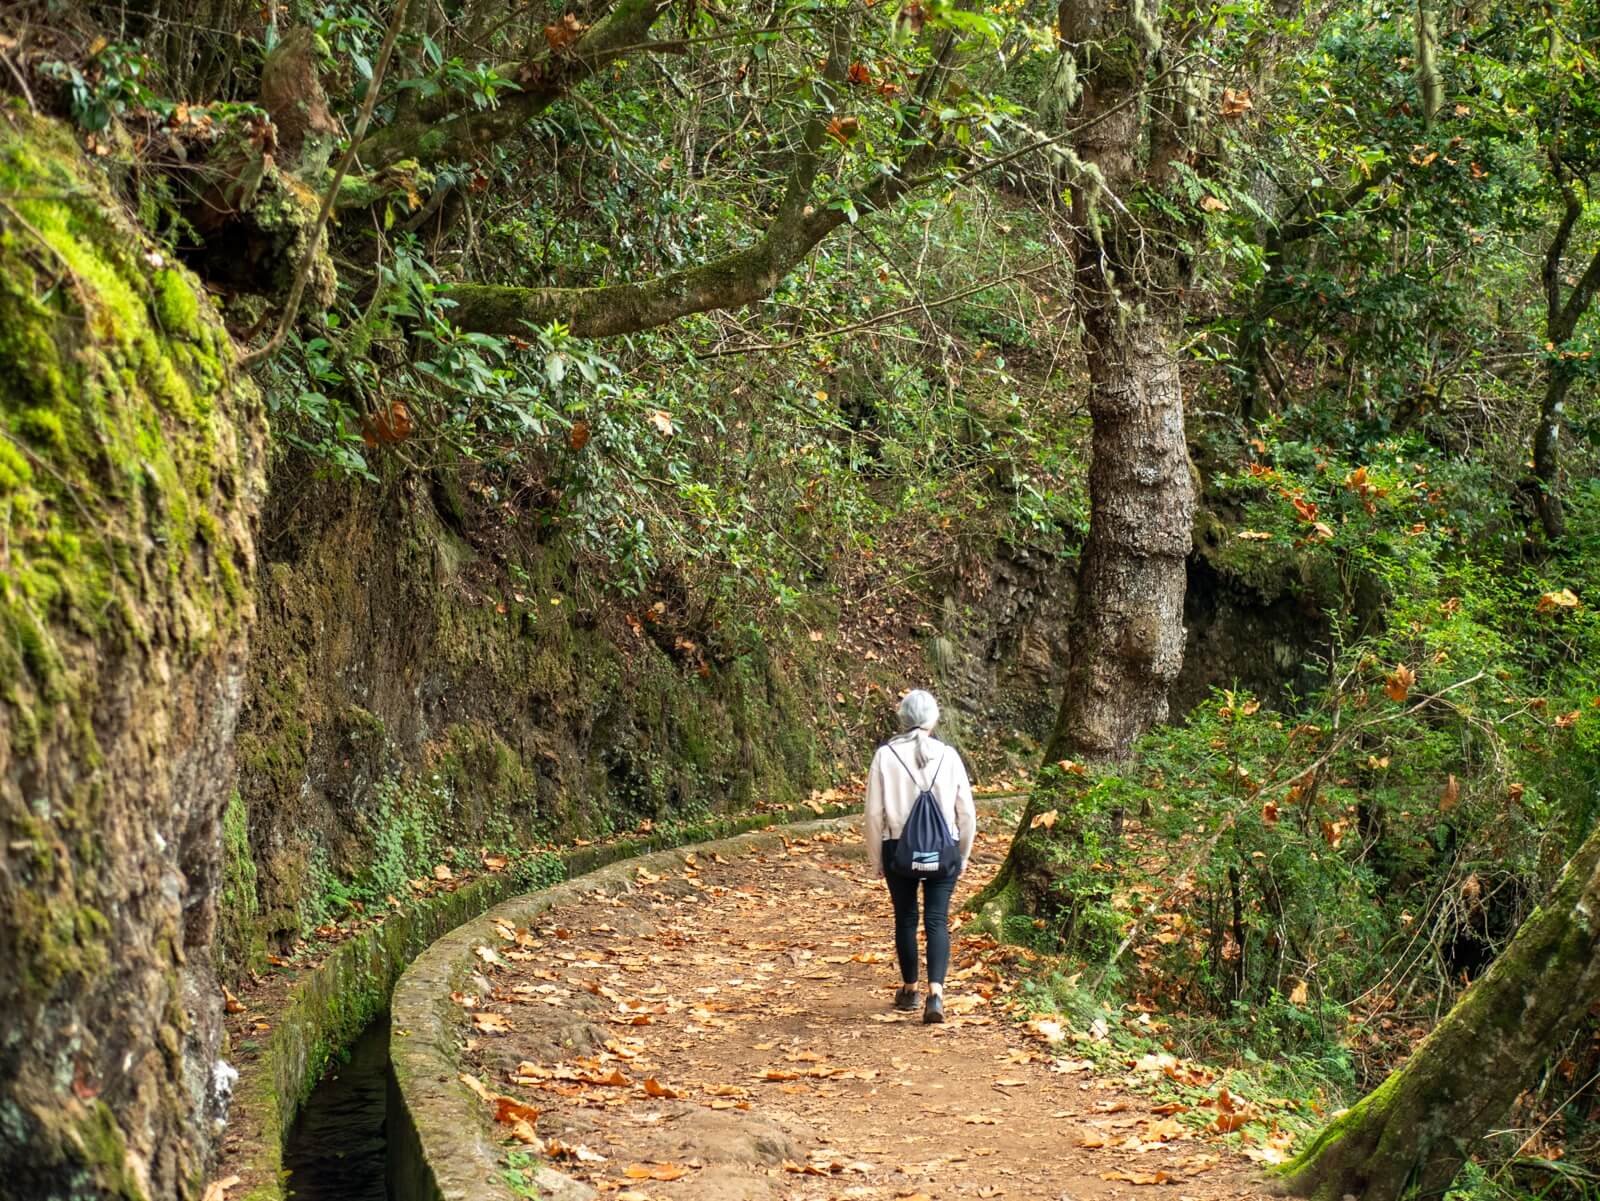 The True Flavours & Natural Beauty of Madeira Islands - Walking the Levadas of Madeira